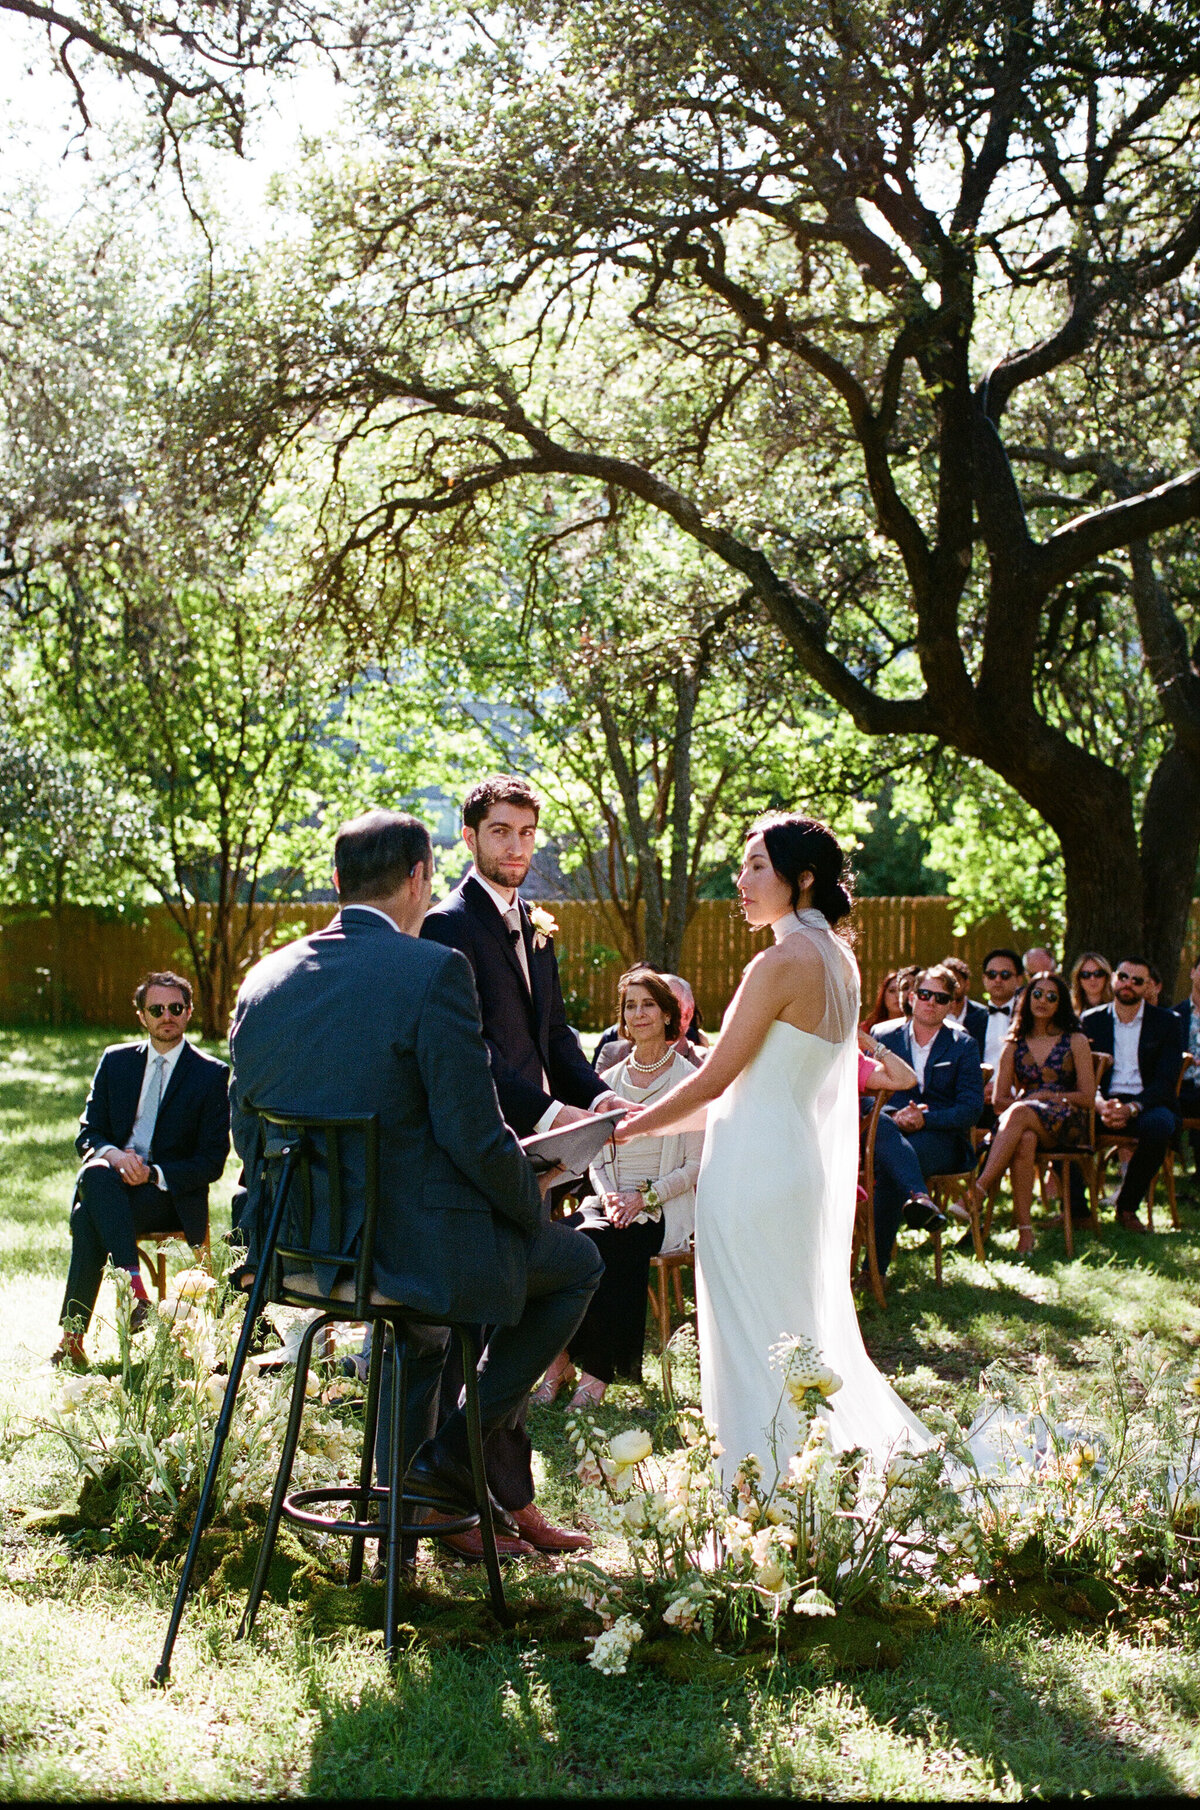 Bride and groom exchanging vows at outdoor wedding ceremony at Mattie's Austin